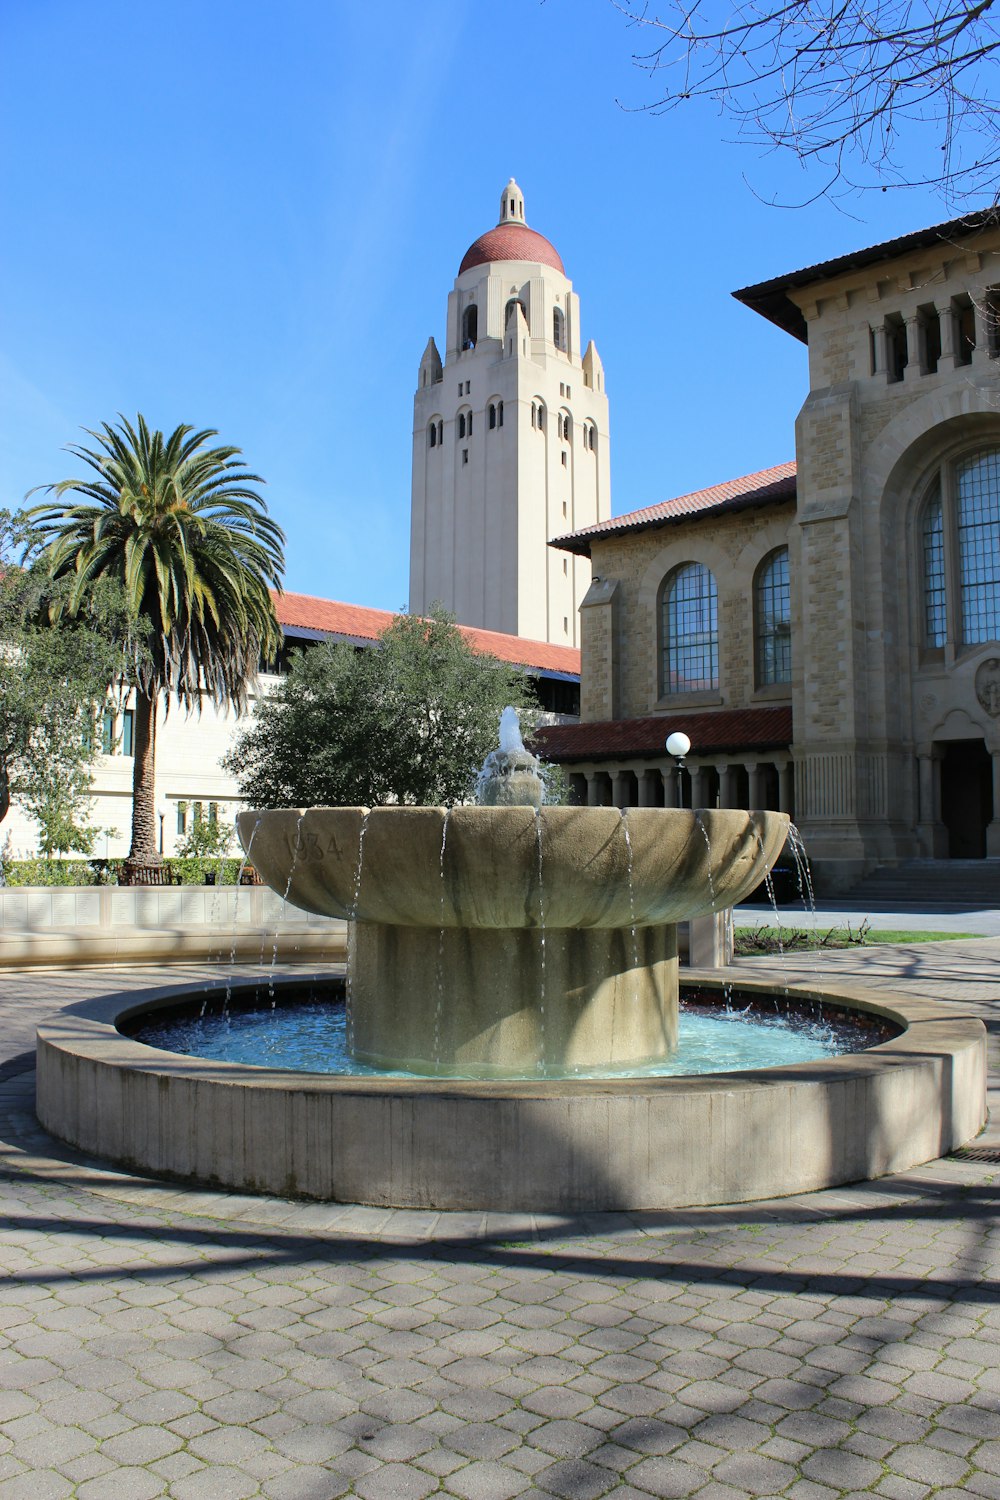 a fountain in front of a building with a clock tower in the background